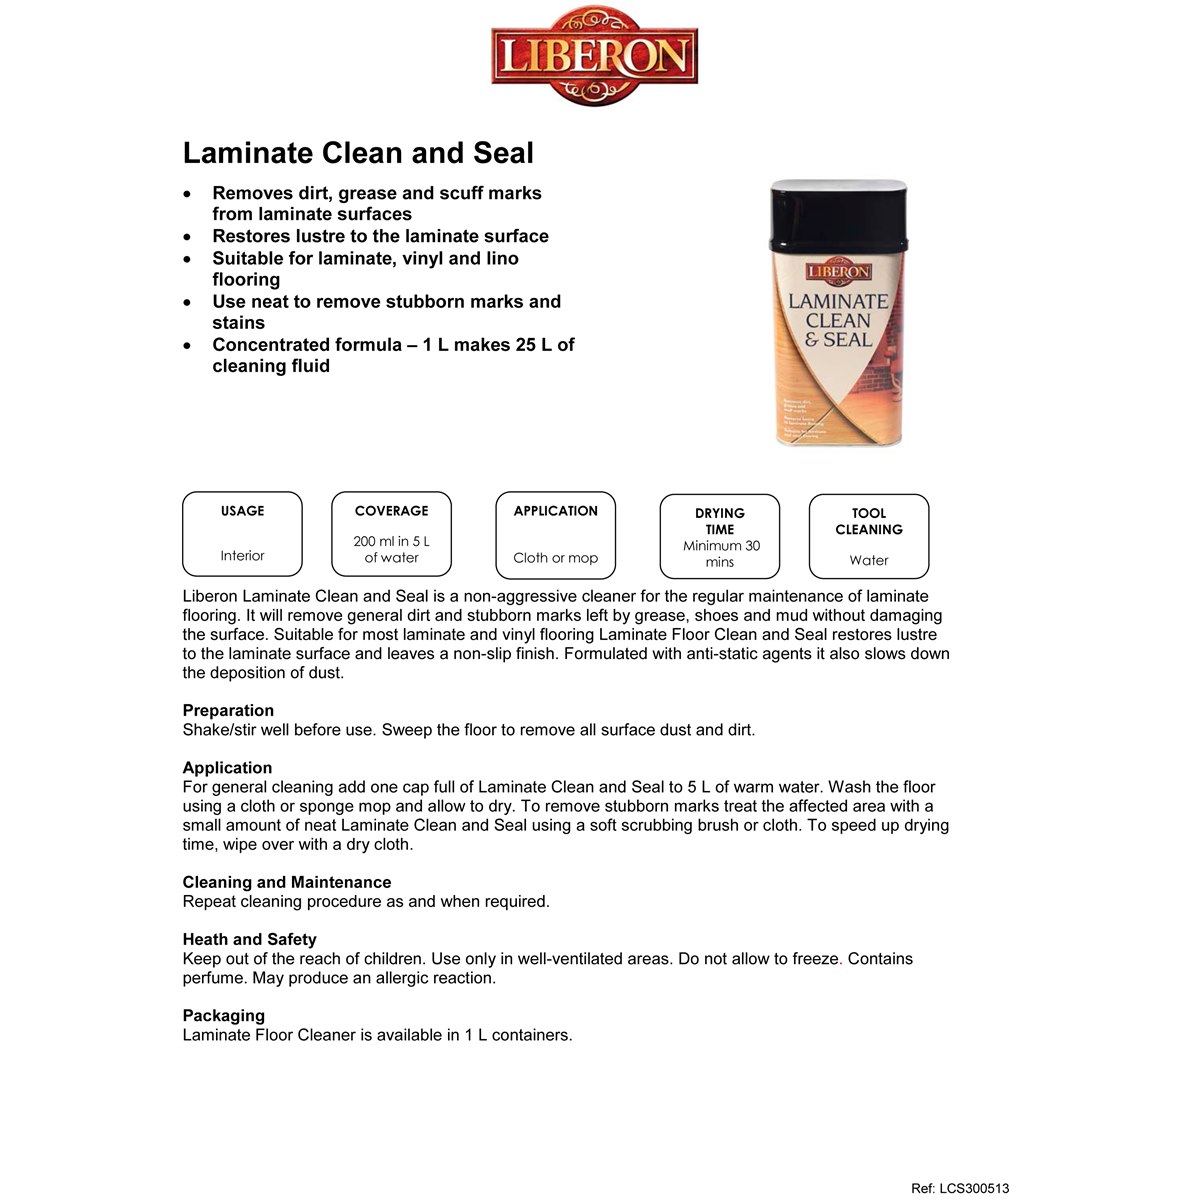 Liberon Laminate Floor Clean and Seal Usage Instructions